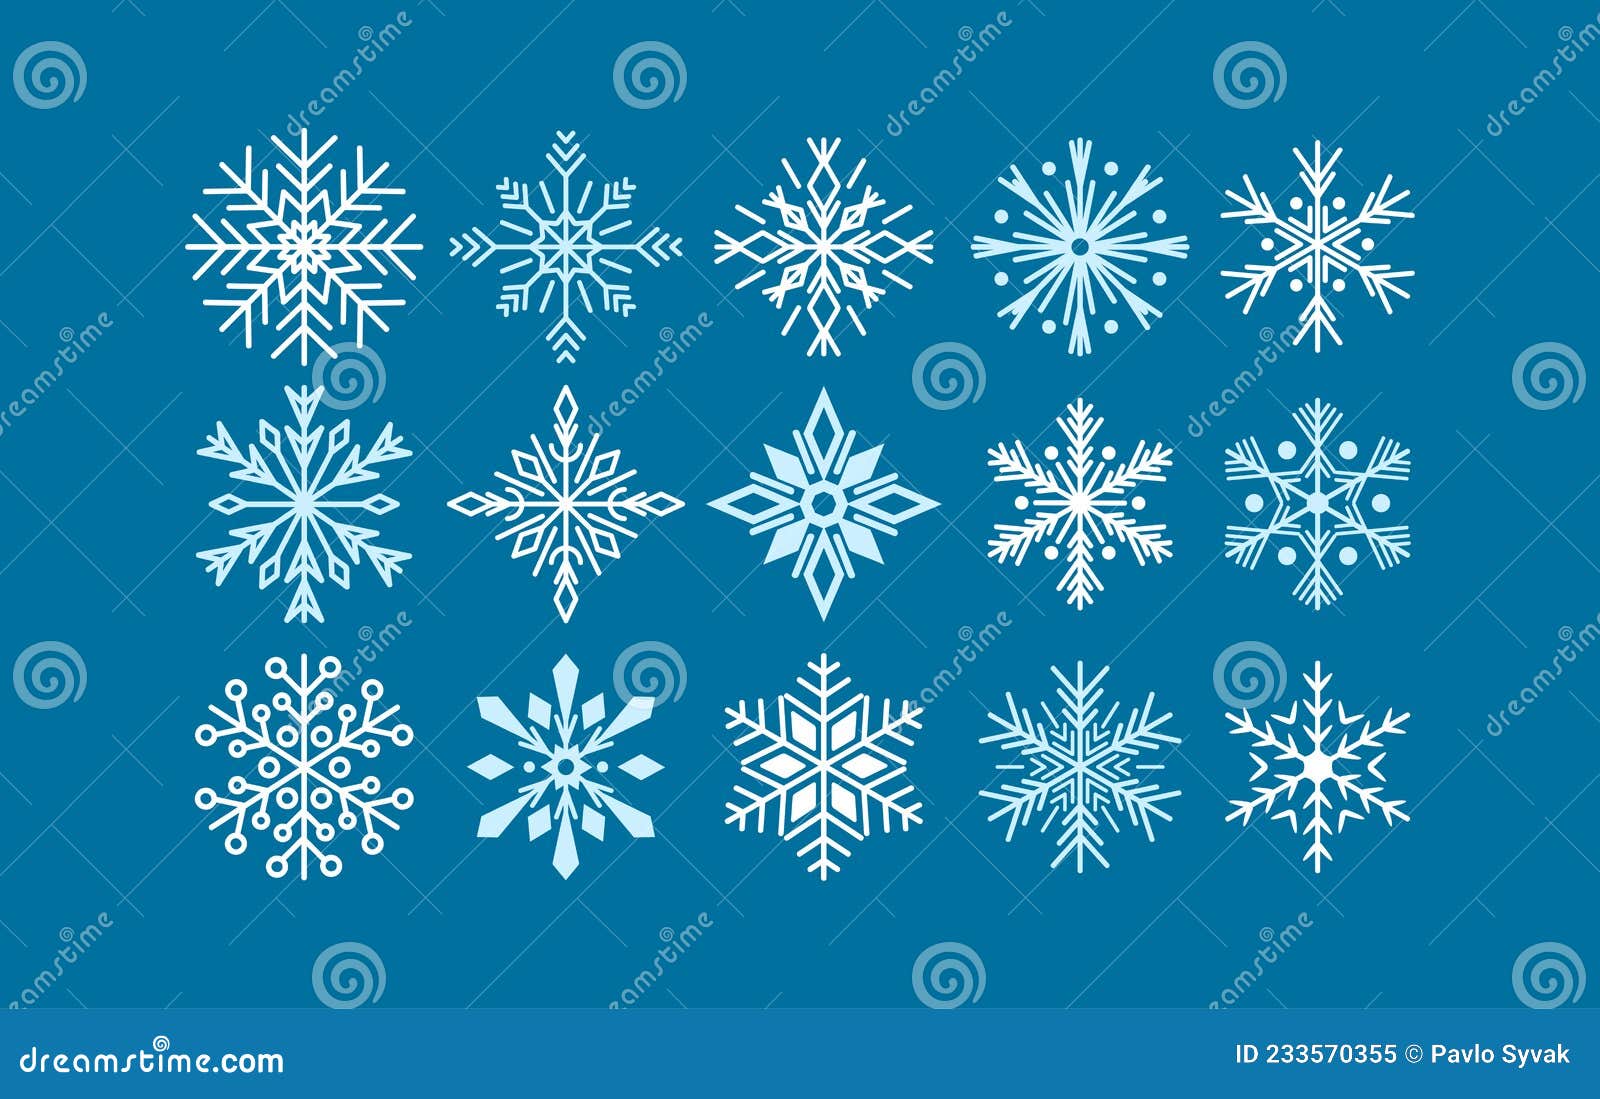 Set of Various Fantasy Snow Flakes on Blue Background. Christmas Winter ...